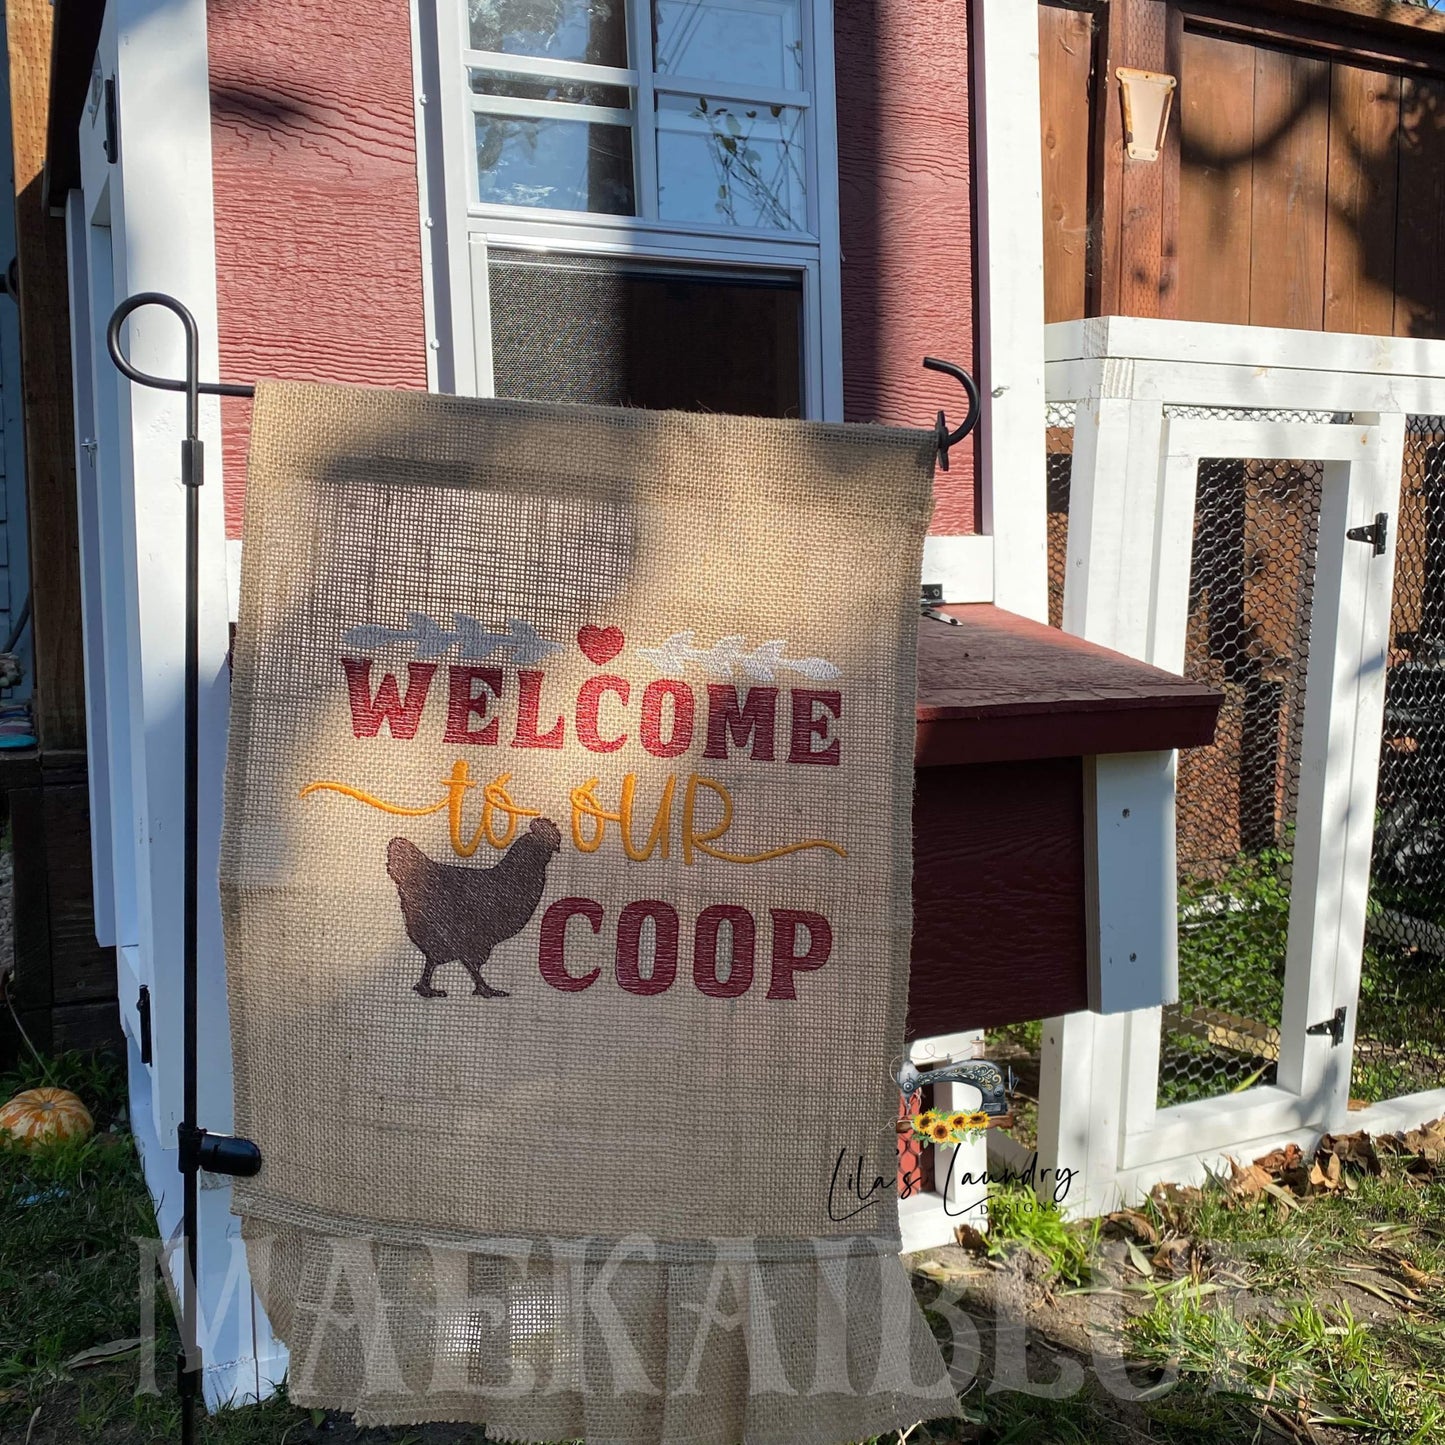 Welcome to our Coop - 4 sizes- Digital Embroidery Design